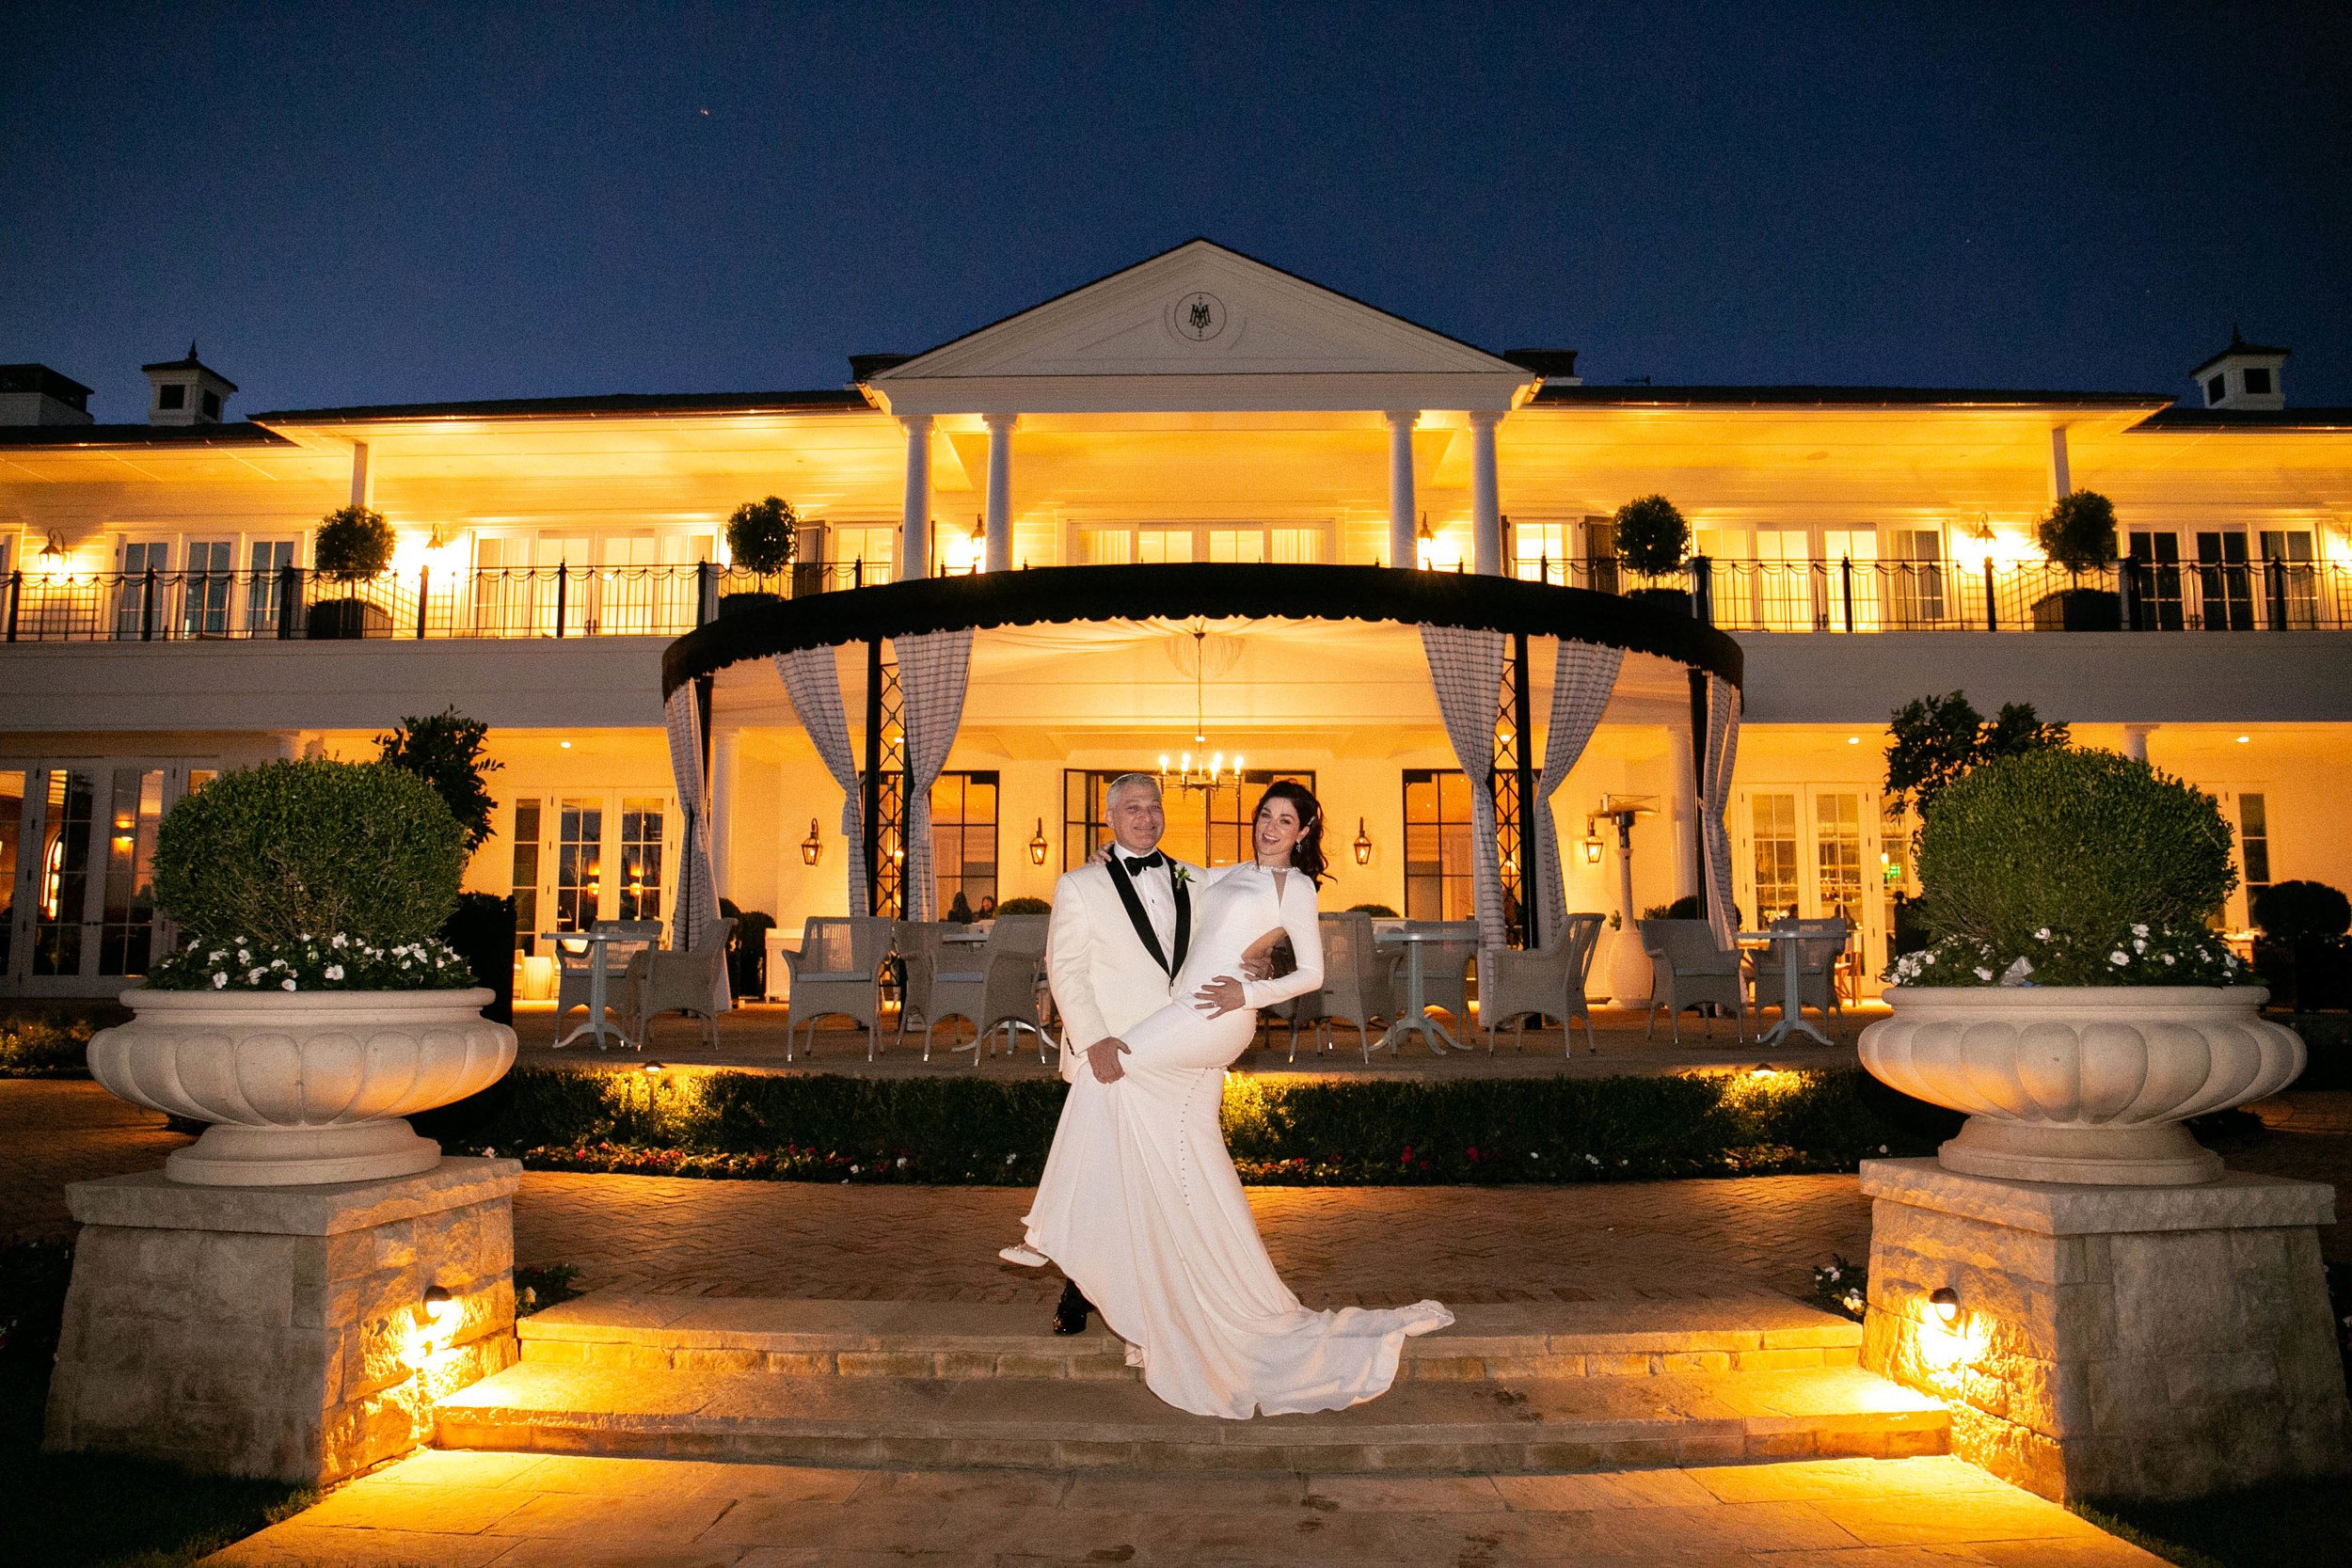 www.santabarbarawedding.com | Laurie Bailey | Rosewood Miramar | Ann Johnson Events | SPARK Creative Events | Couple in Front of the Venue at Night